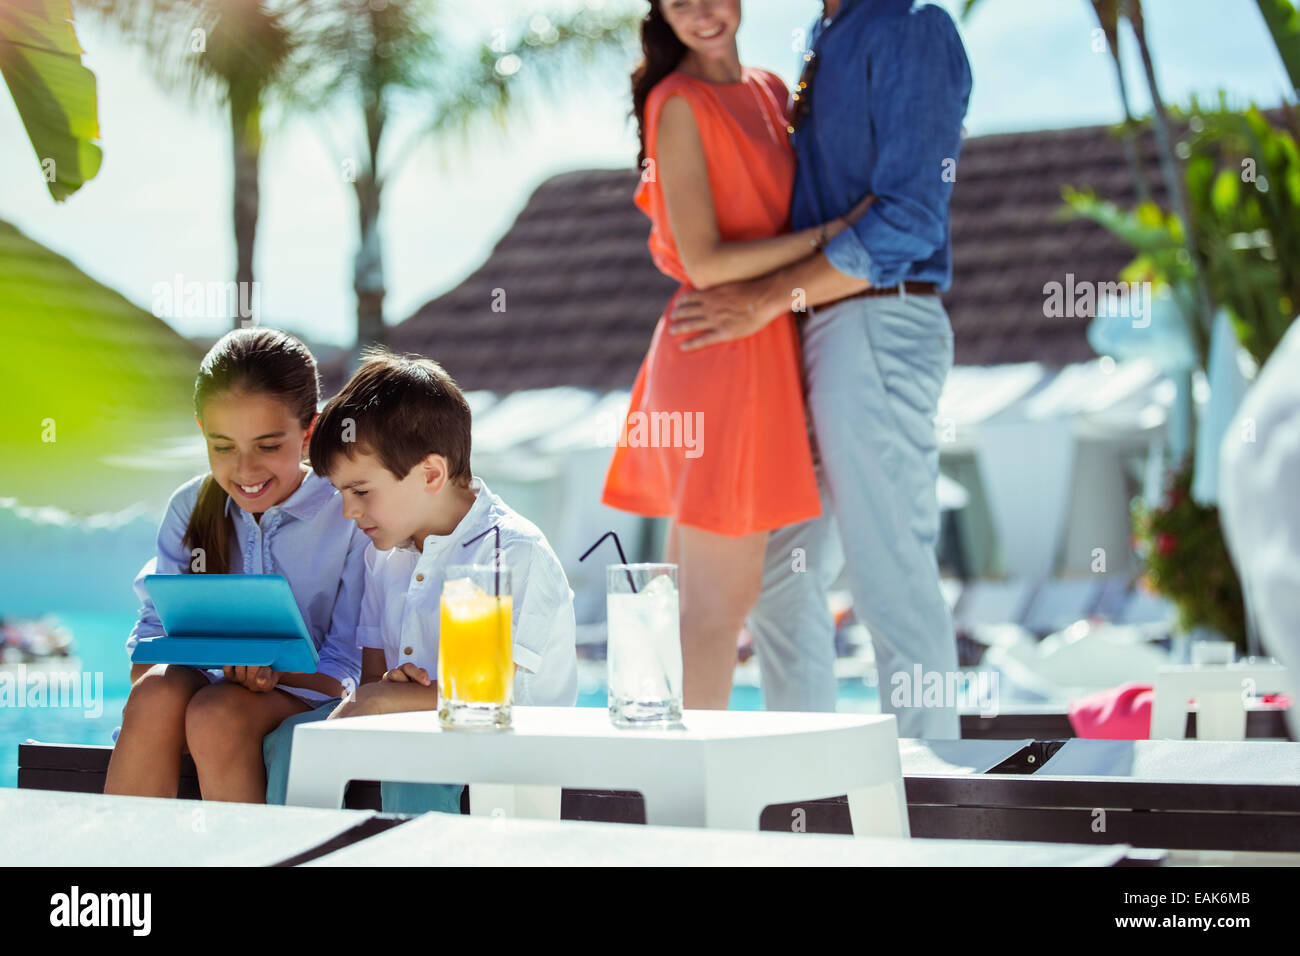 Brother and sister using digital tablet by resort swimming pool, parents embracing in background Stock Photo